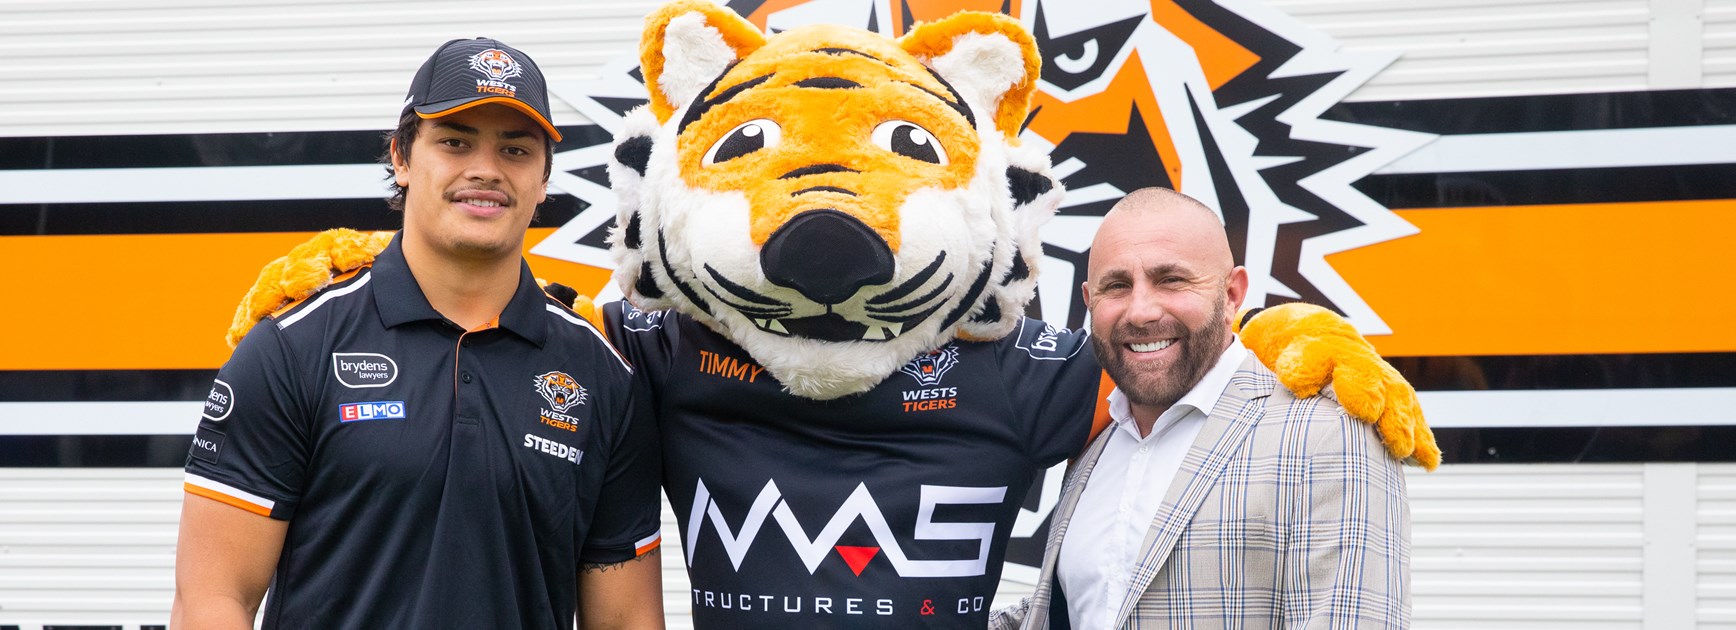 MAS Structures & Co extend partnership with Wests Tigers